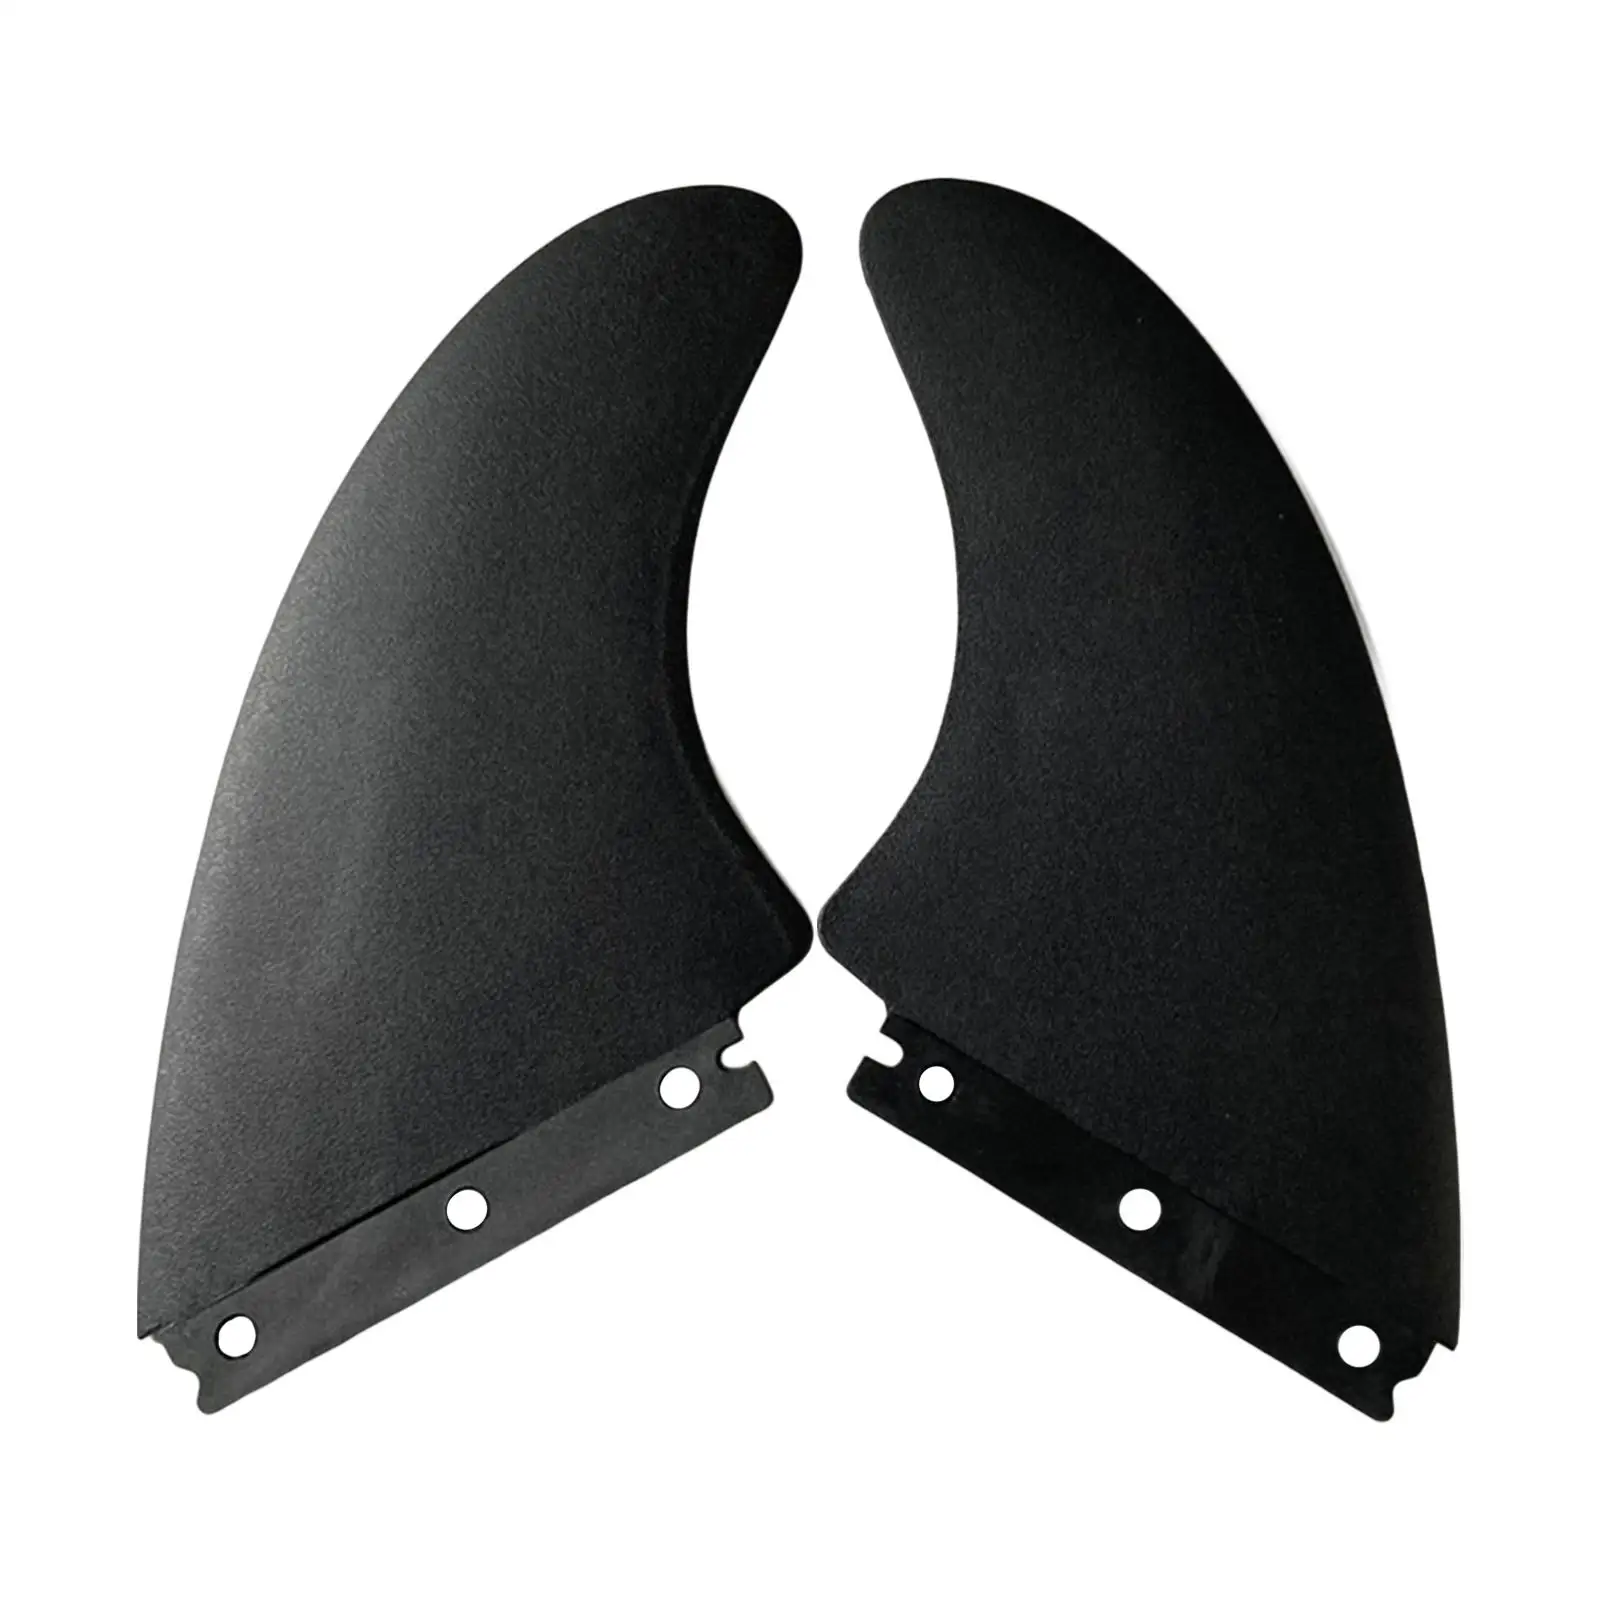 2Pcs Surfboard Fins Surf Board Tail Rudder Replacement Quick Release Surfing Surf for Water Sports Canoe Stand up Paddleboard